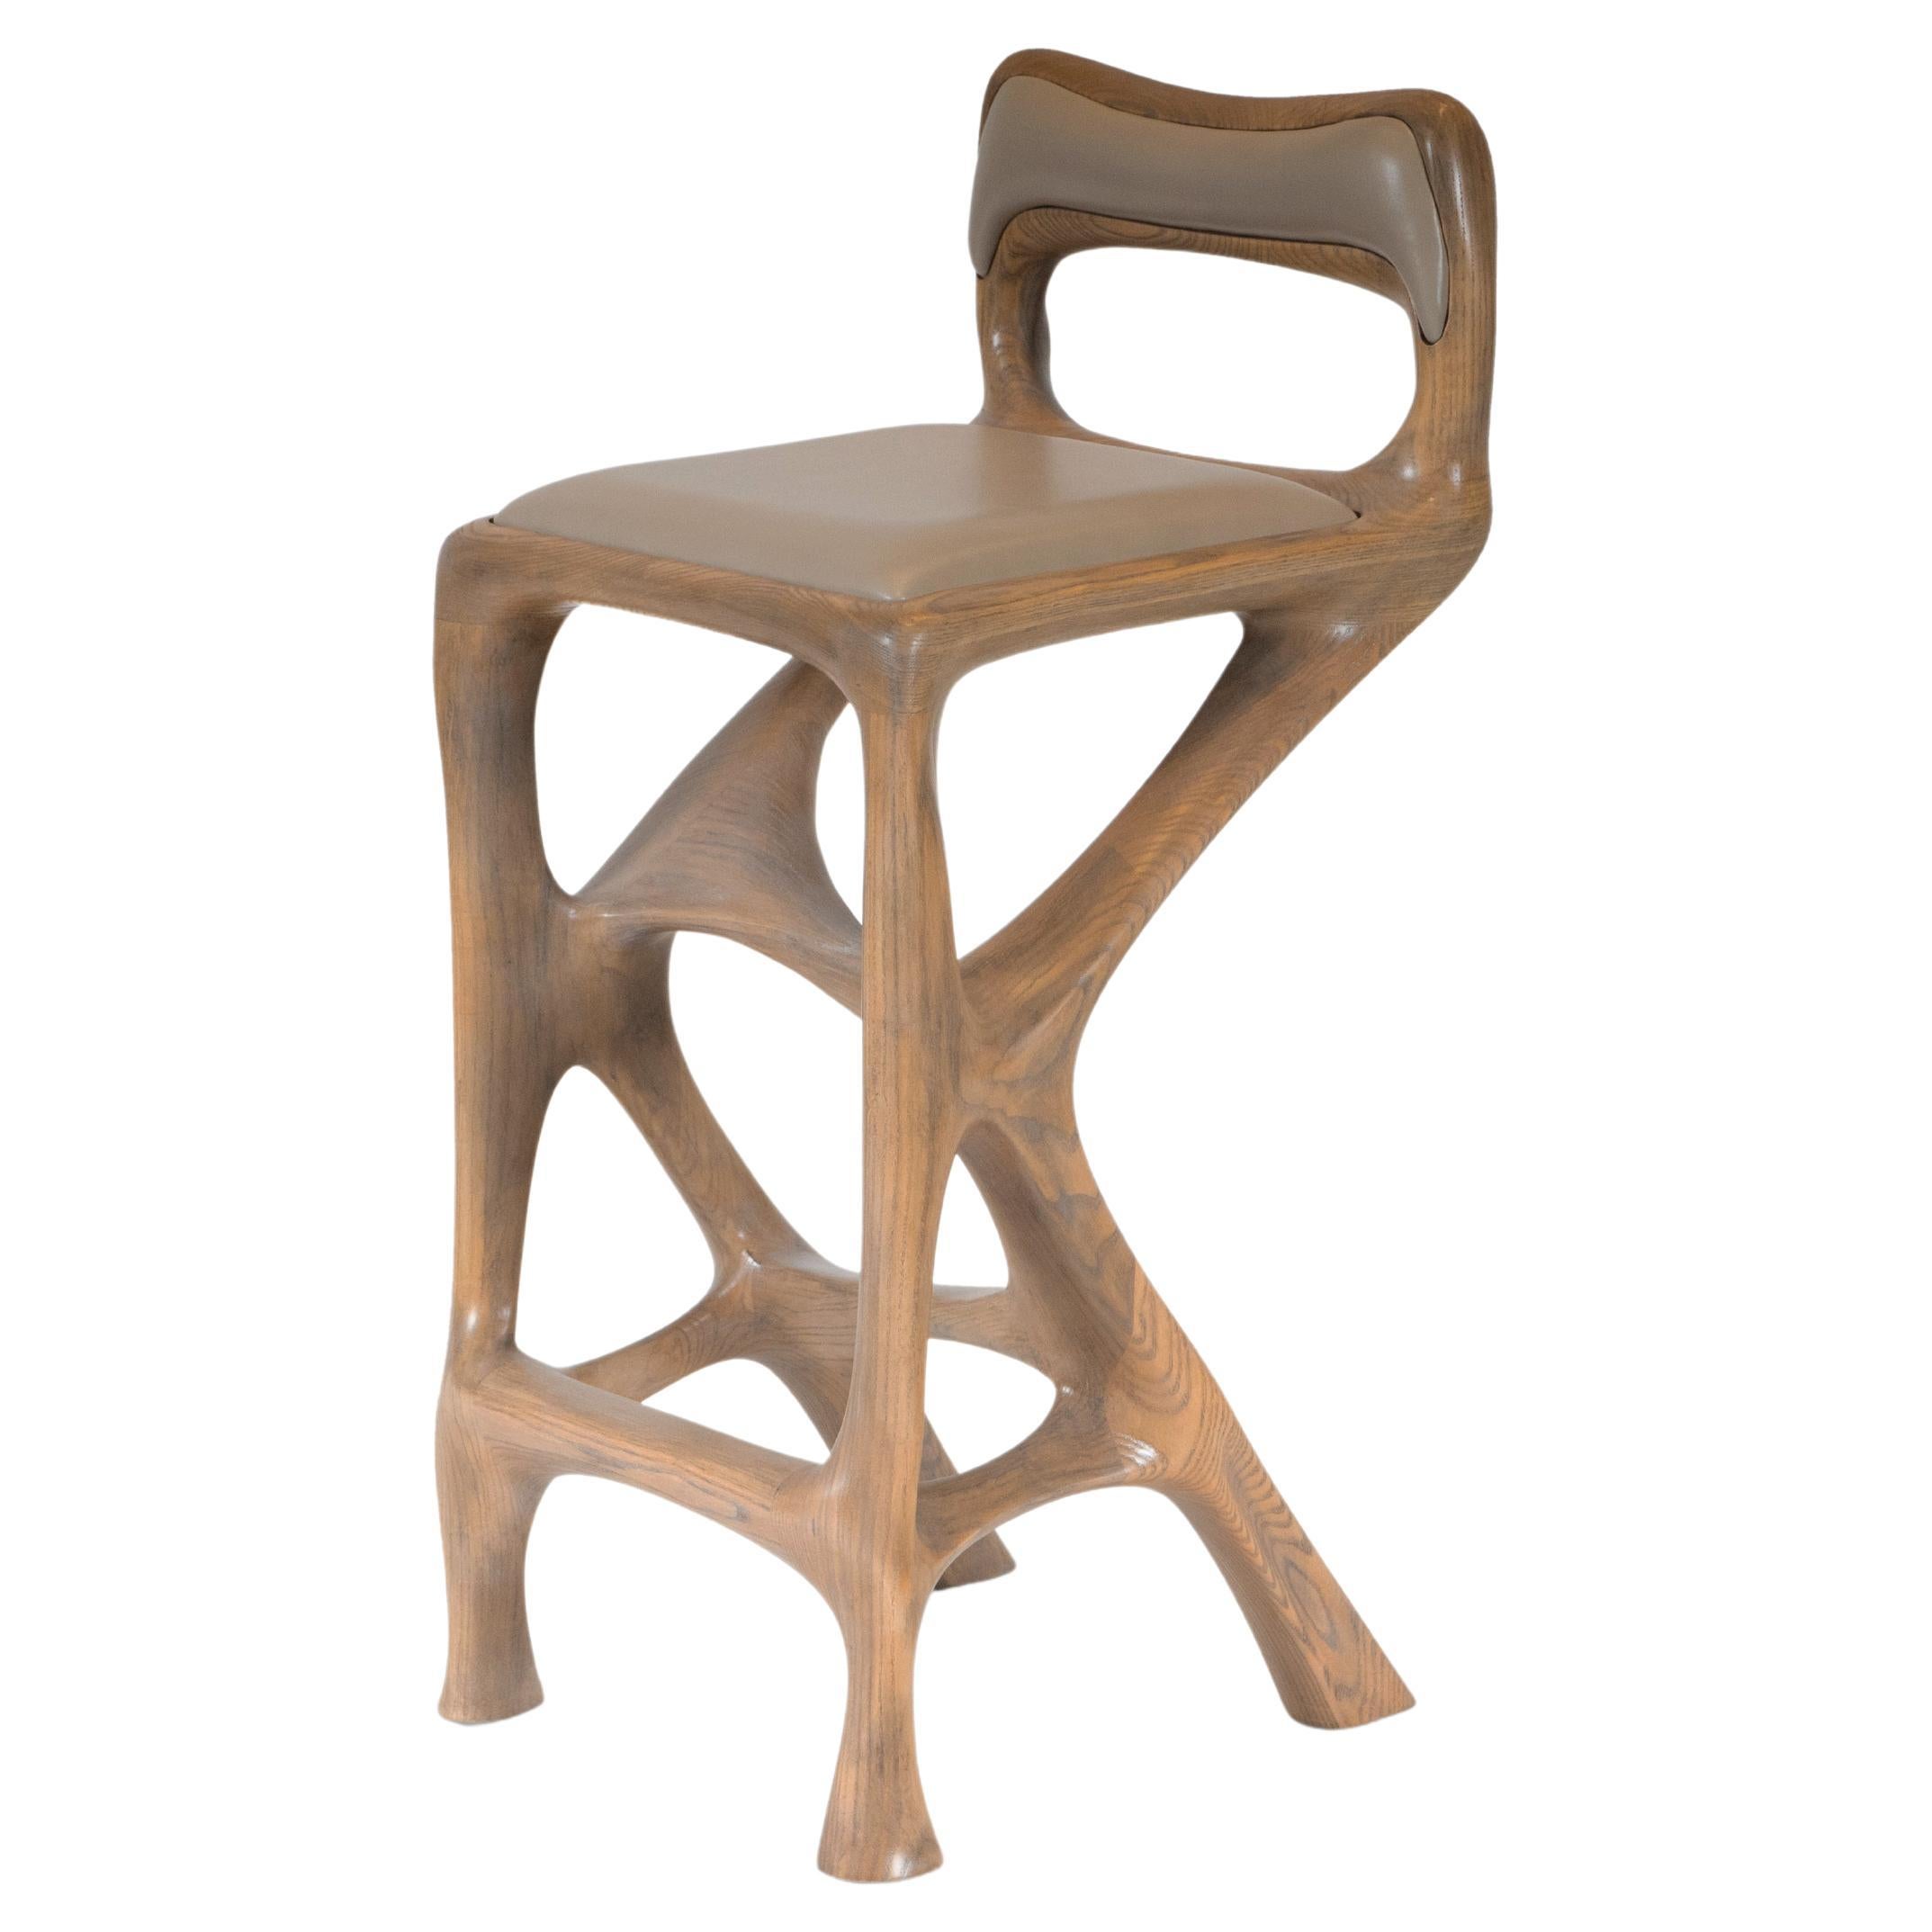 Amorph Chimera Bar Stool with Back in Antique Oak stain on Ash wood 